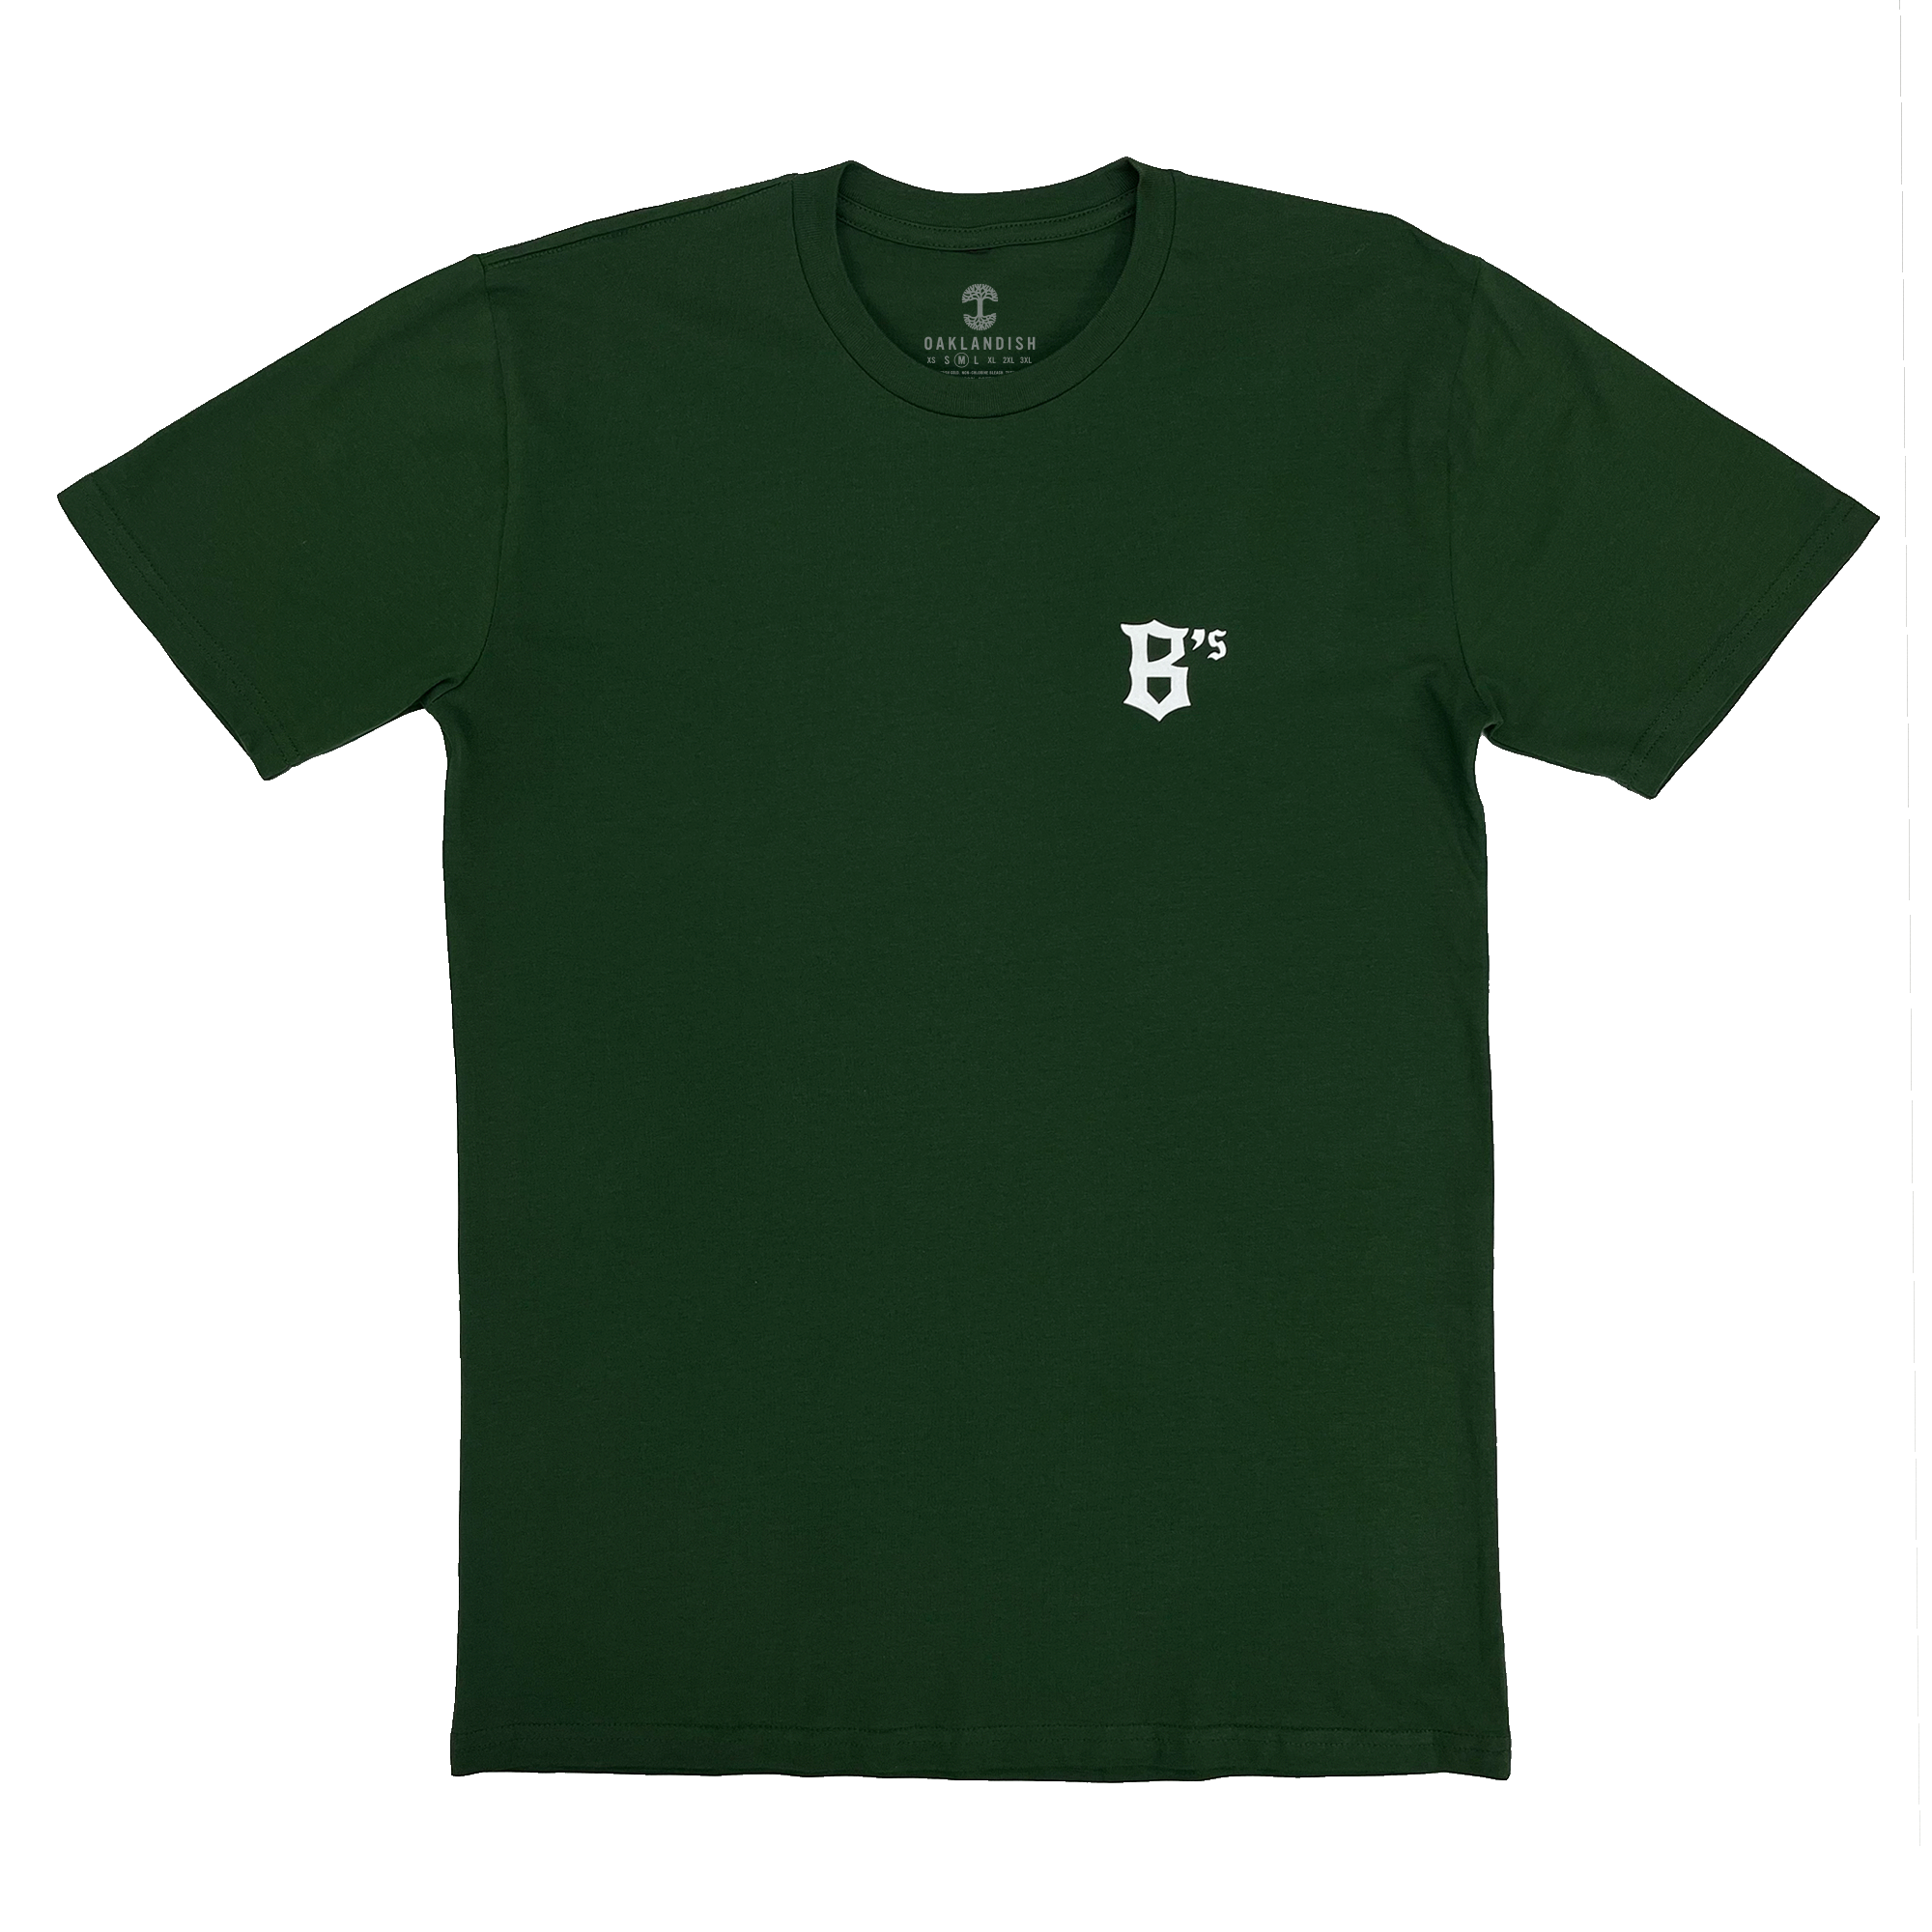 B's logo in white ink on forest tee.